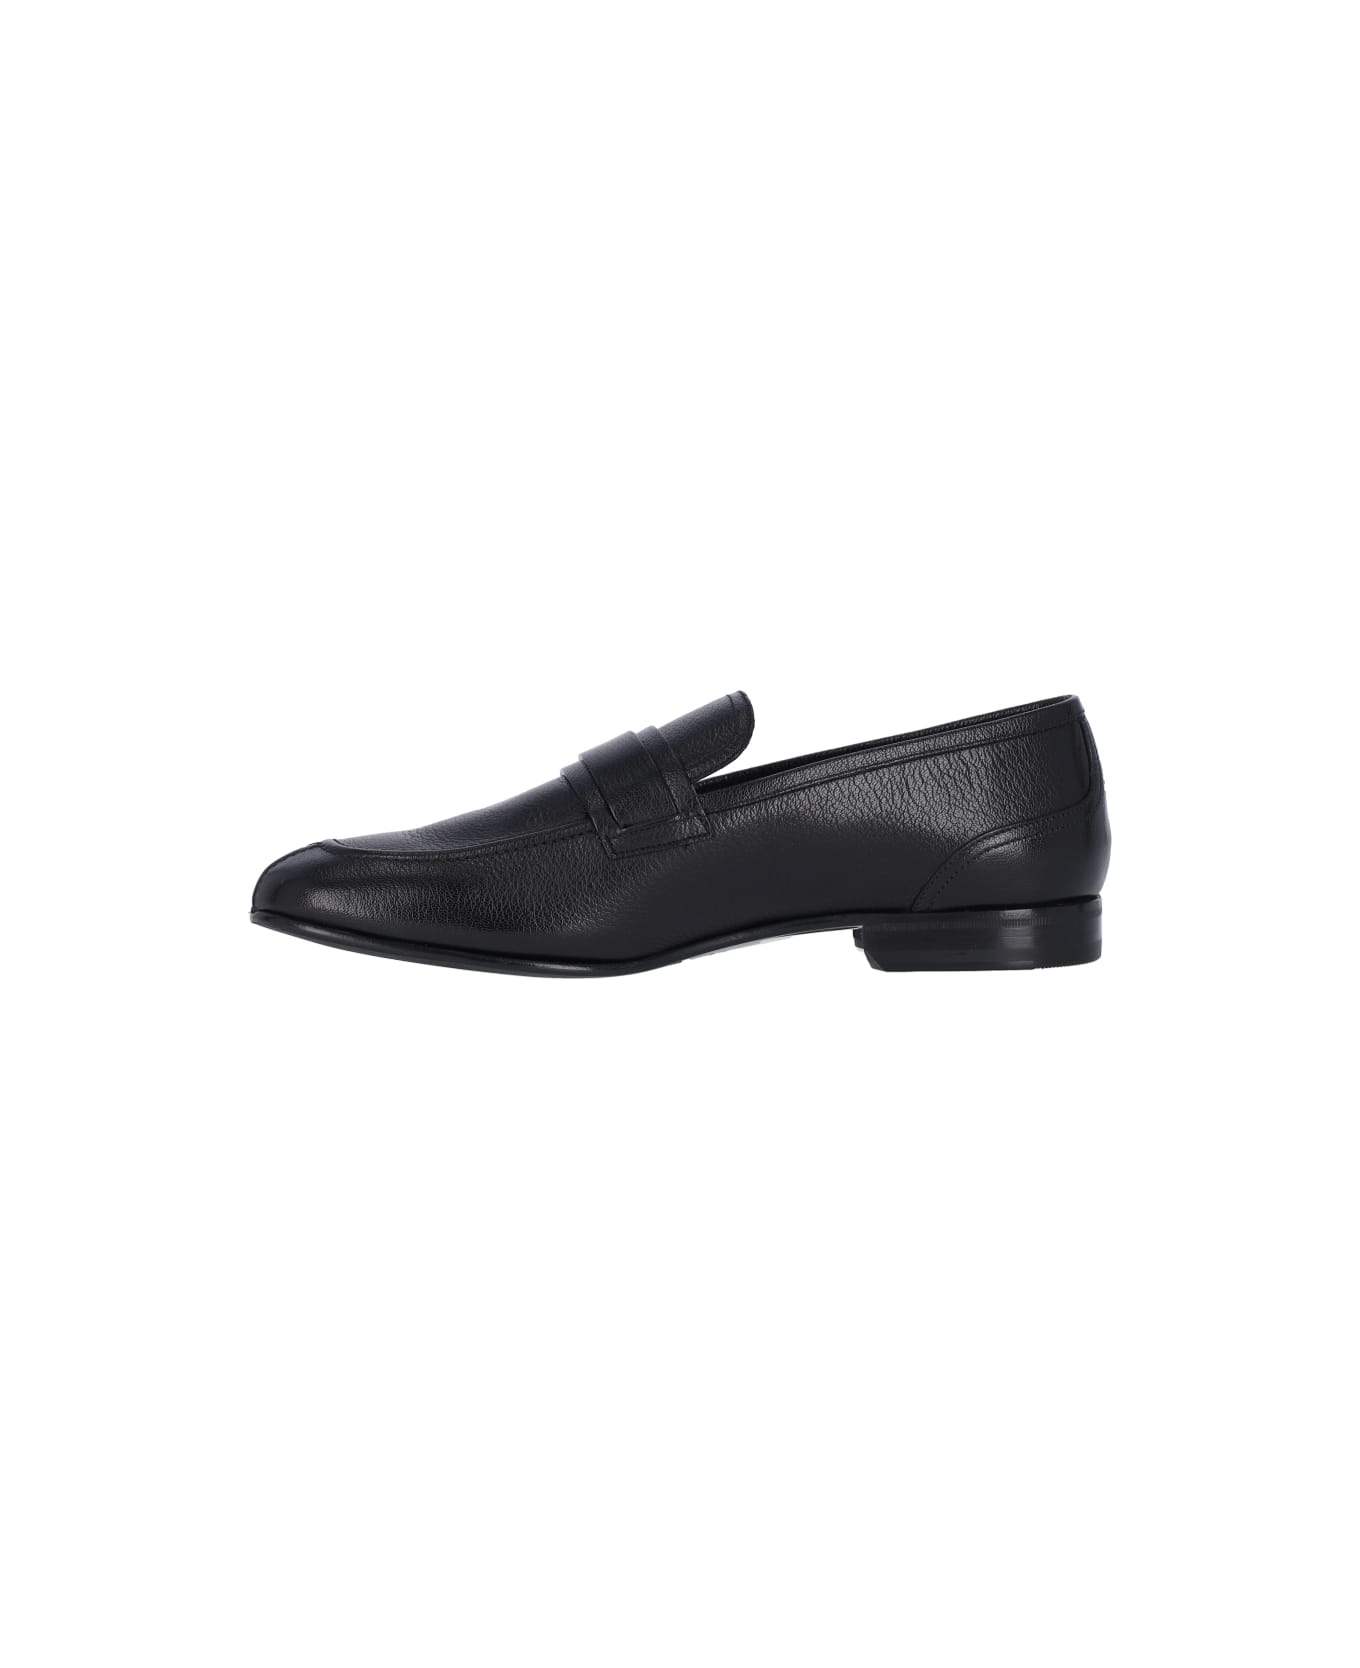 Bally 'suisse' Loafers - Black  